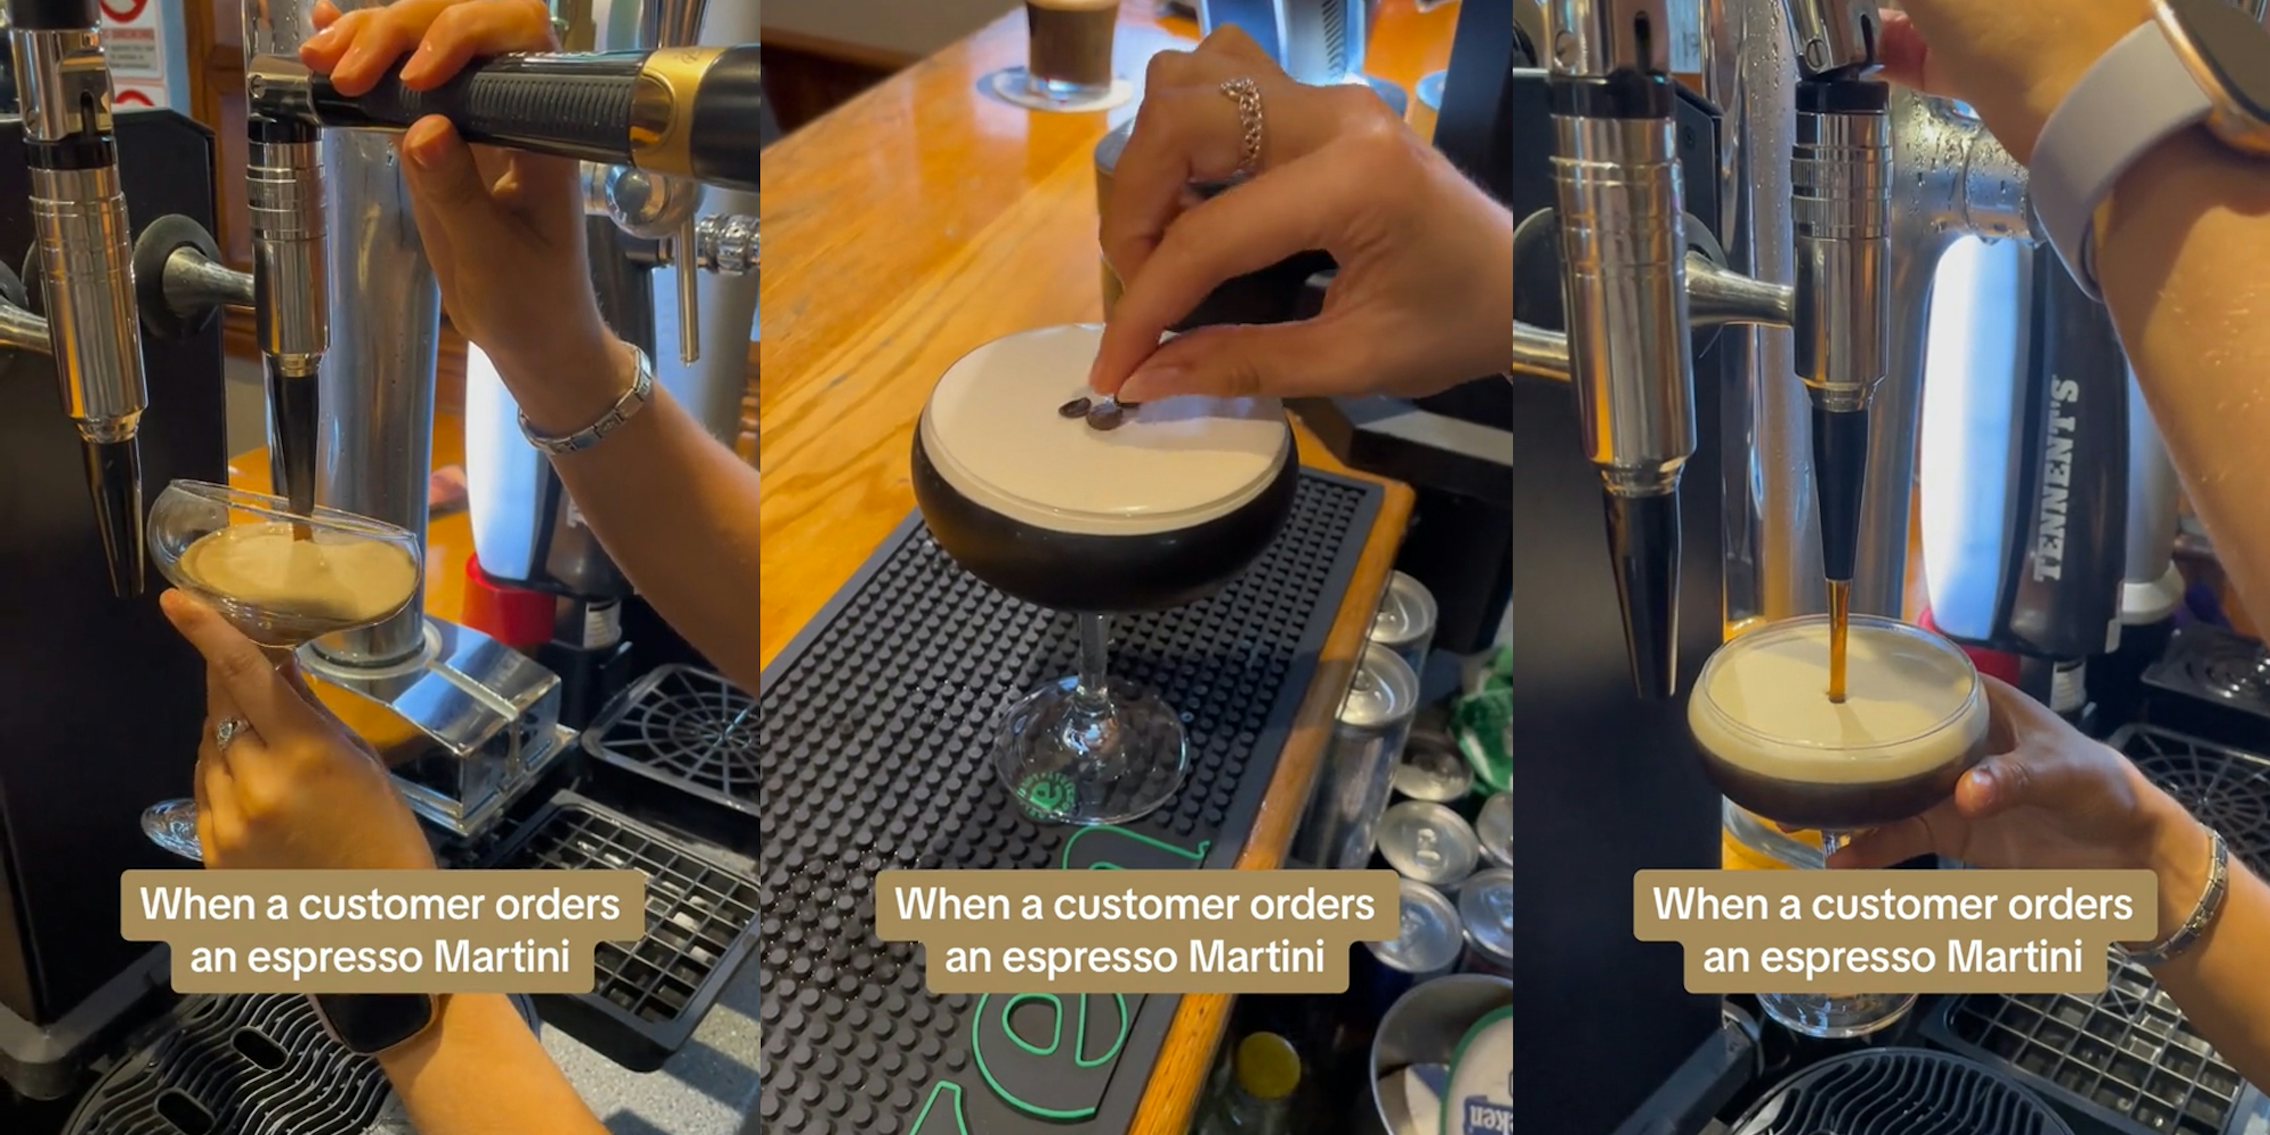 bar employee making an espresso martini with caption 'When a customer orders an espresso Martini' (l) bar employee adding coffee beans topping to an espresso martini with caption 'When a customer orders an espresso Martini' (c) bar employee making an espresso martini with caption 'When a customer orders an espresso Martini' (r)